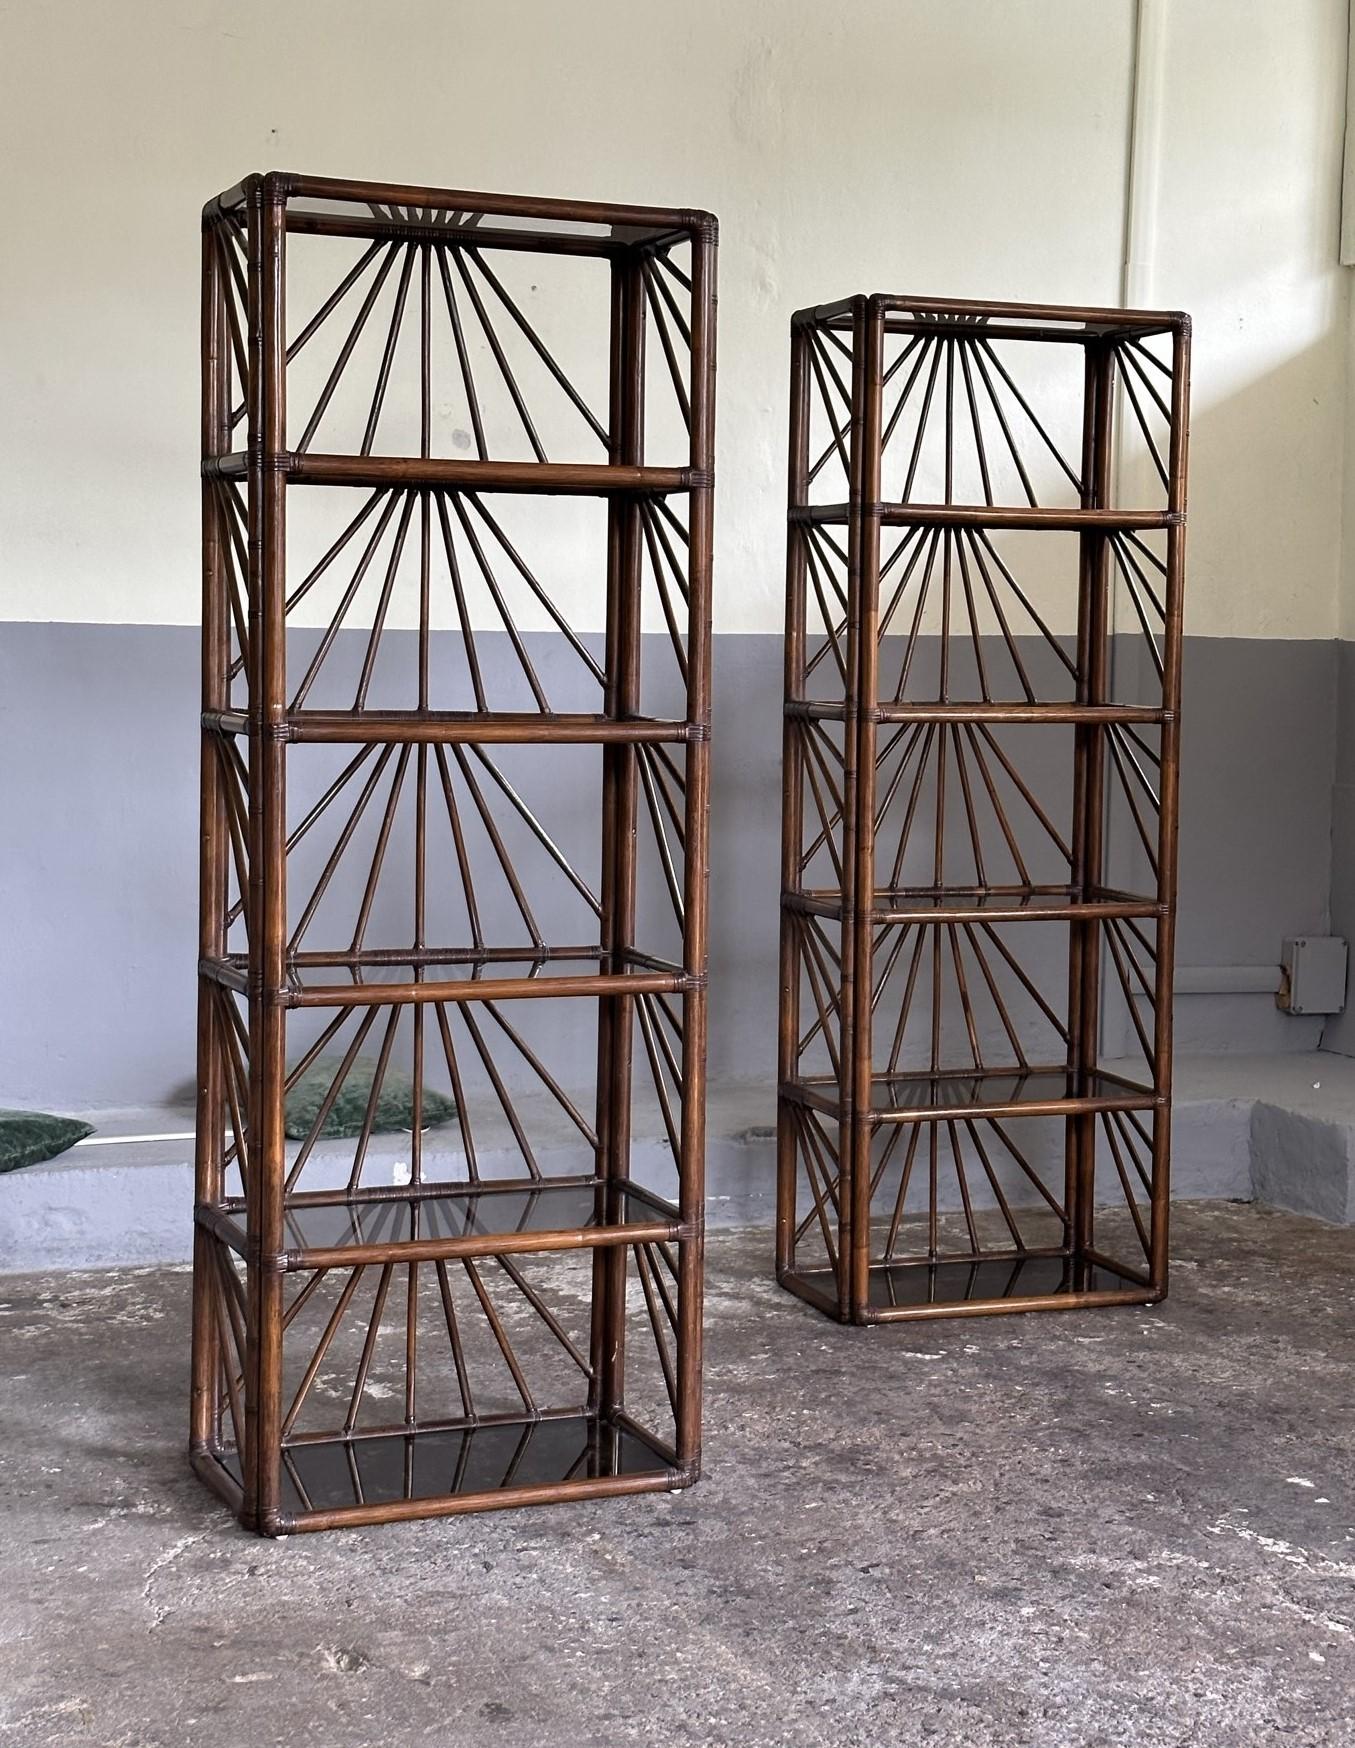 Set of two bamboo bookcases dating back to around the seventies, Italian manufacturing.
The two bookcases have six brown glass shelves.
Glass dimensions: width 64cm x 33.5 cm
Two pieces are available
good general condition